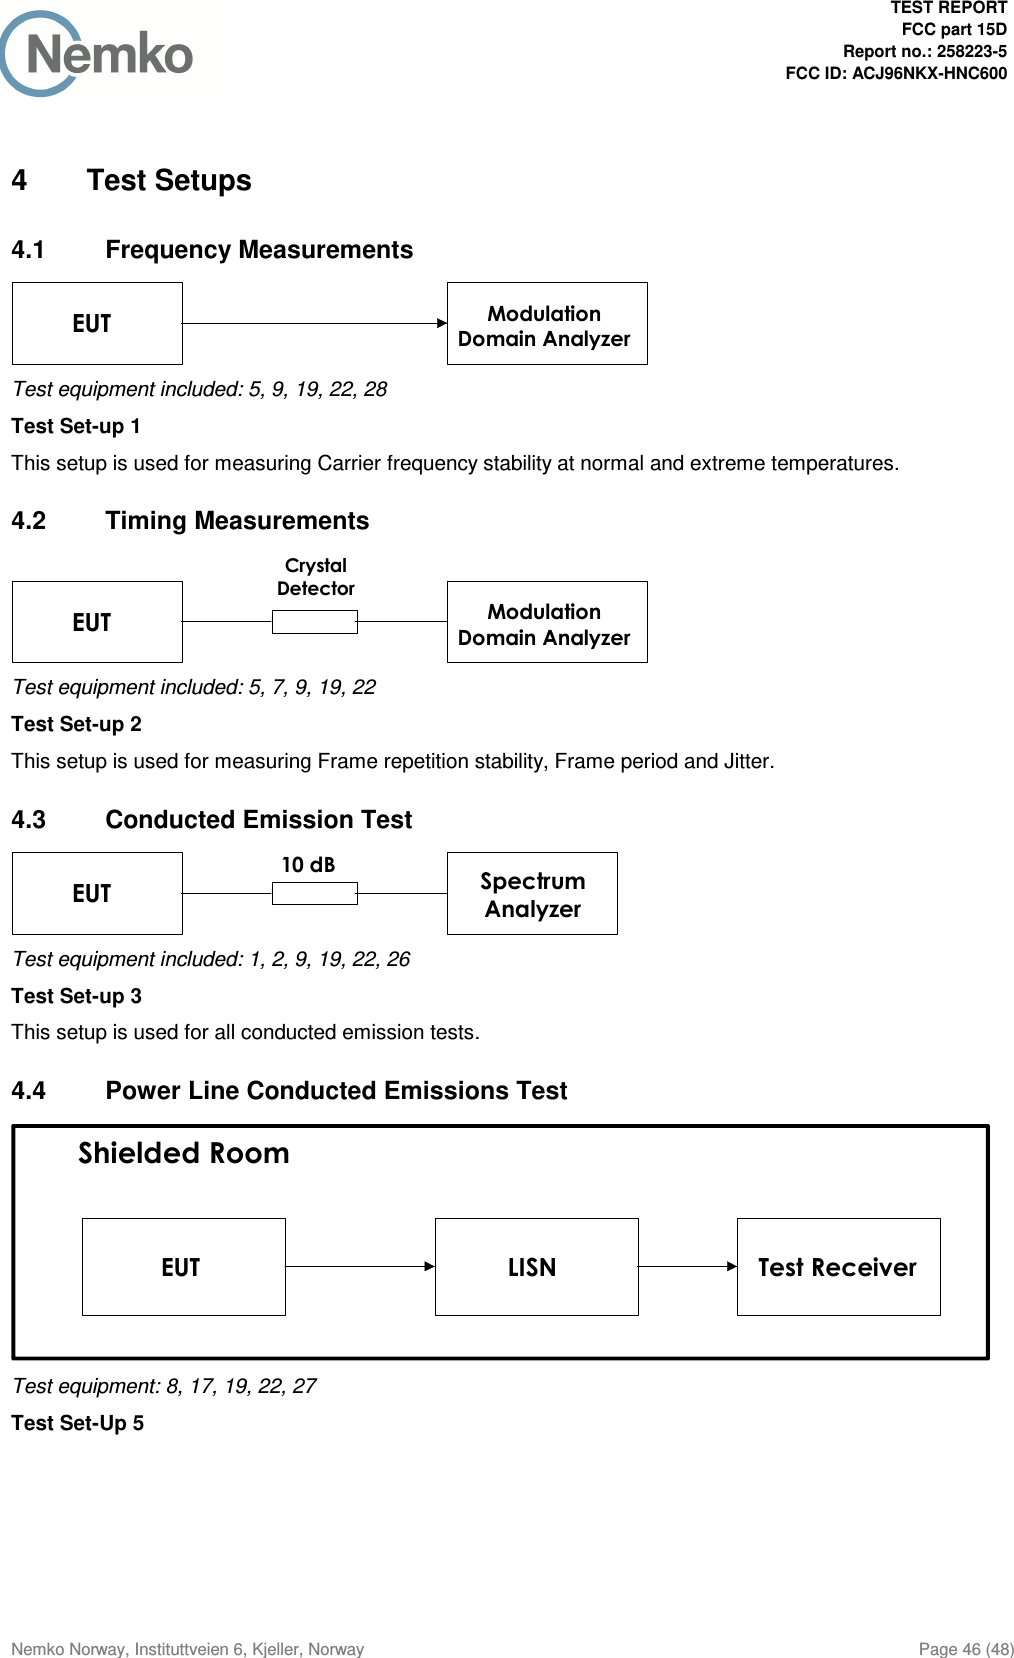  TEST REPORT  FCC part 15D Report no.: 258223-5 FCC ID: ACJ96NKX-HNC600  Nemko Norway, Instituttveien 6, Kjeller, Norway  Page 46 (48)  4  Test Setups 4.1  Frequency Measurements ModulationDomain AnalyzerEUT Test equipment included: 5, 9, 19, 22, 28 Test Set-up 1 This setup is used for measuring Carrier frequency stability at normal and extreme temperatures. 4.2  Timing Measurements ModulationDomain AnalyzerEUTCrystalDetector Test equipment included: 5, 7, 9, 19, 22 Test Set-up 2 This setup is used for measuring Frame repetition stability, Frame period and Jitter. 4.3  Conducted Emission Test SpectrumAnalyzerEUT10 dB Test equipment included: 1, 2, 9, 19, 22, 26 Test Set-up 3 This setup is used for all conducted emission tests. 4.4  Power Line Conducted Emissions Test EUT LISN Test ReceiverShielded Room Test equipment: 8, 17, 19, 22, 27 Test Set-Up 5 